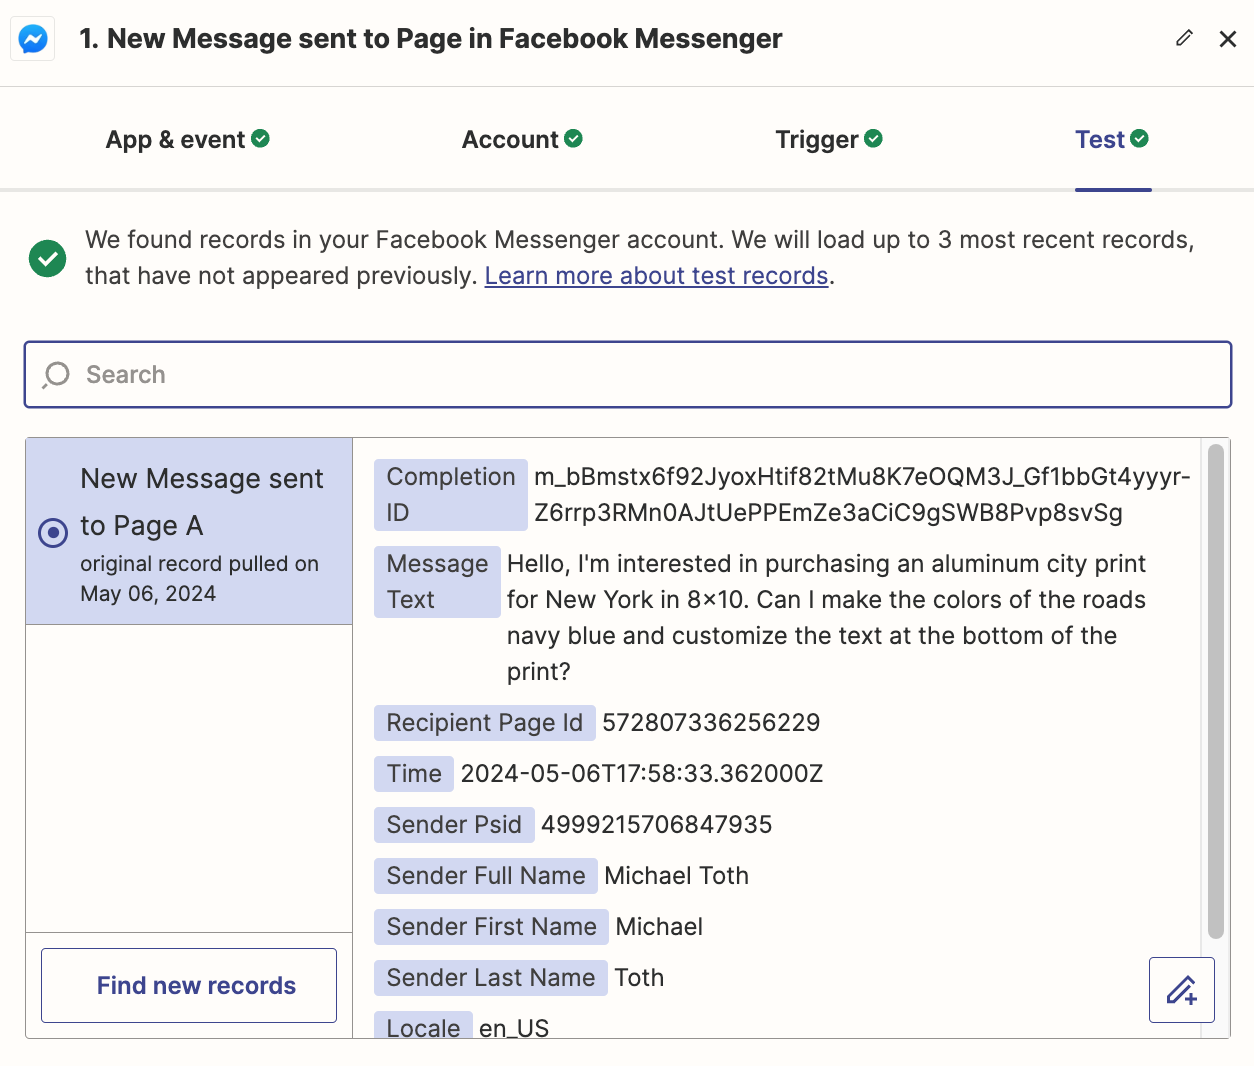 A Facebook Messenger message is shown selected.